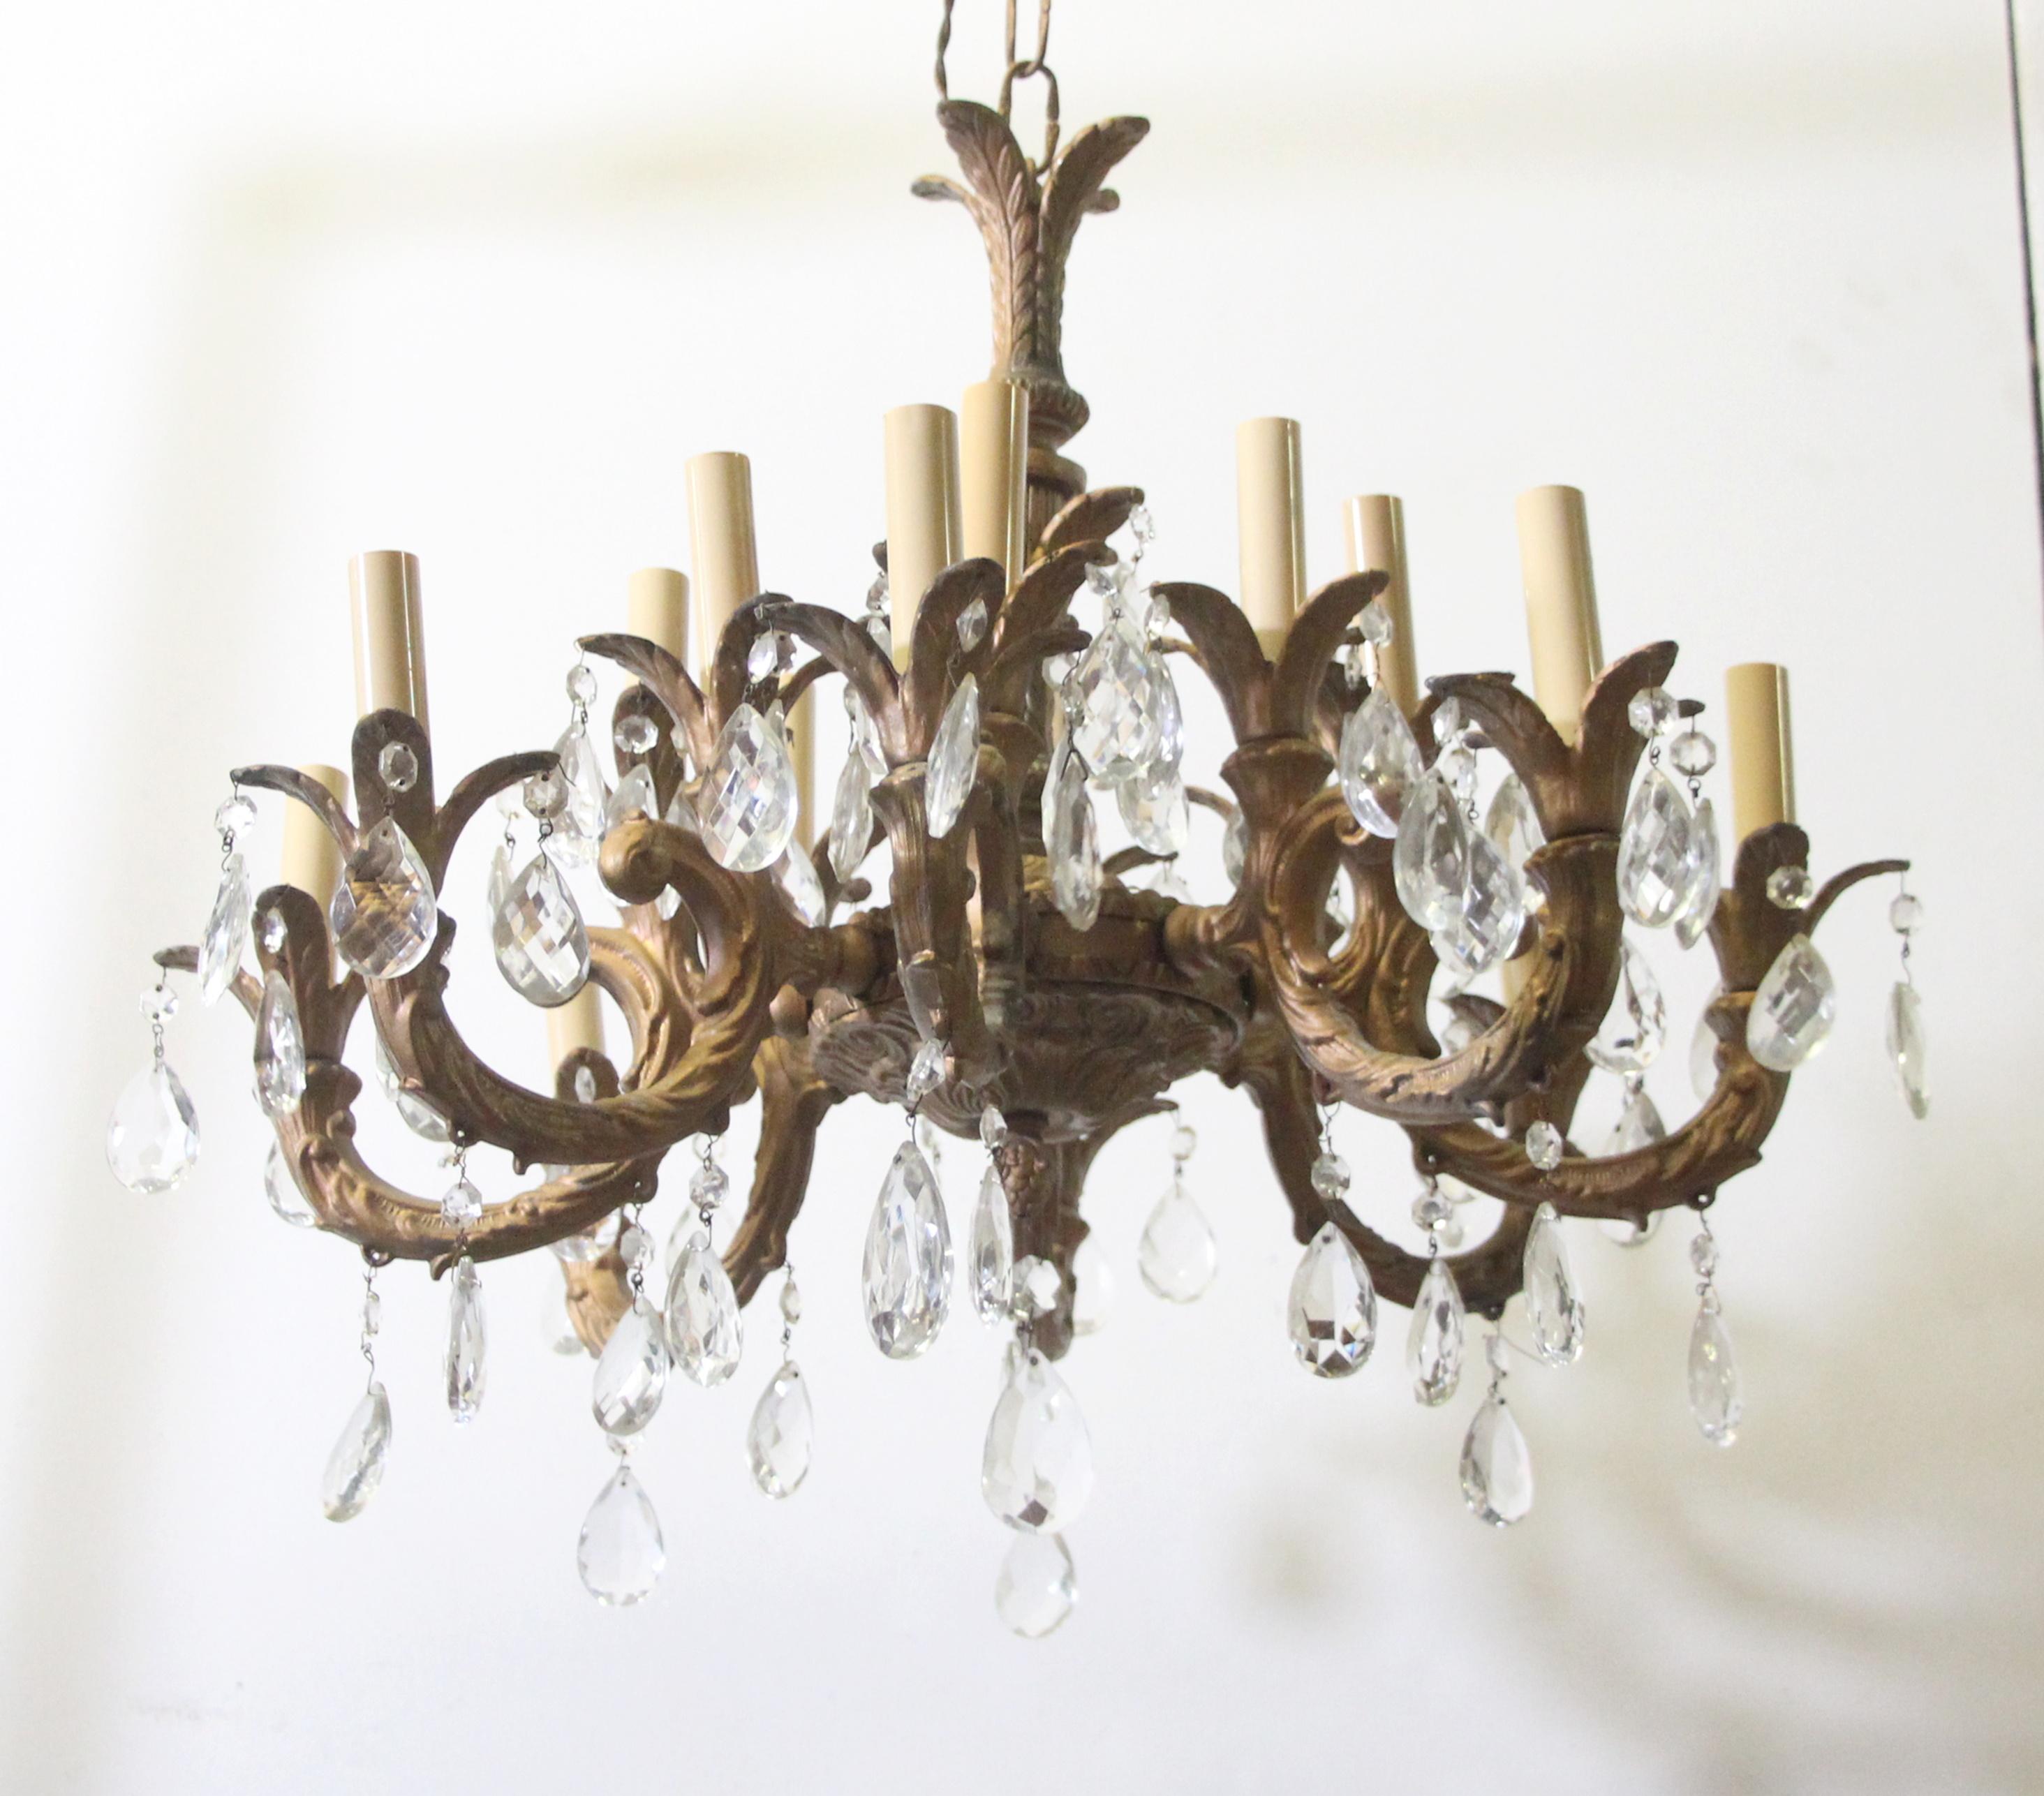 Cast brass Spanish chandelier with 8 detailed arms and clear crystals. Price includes restoration.